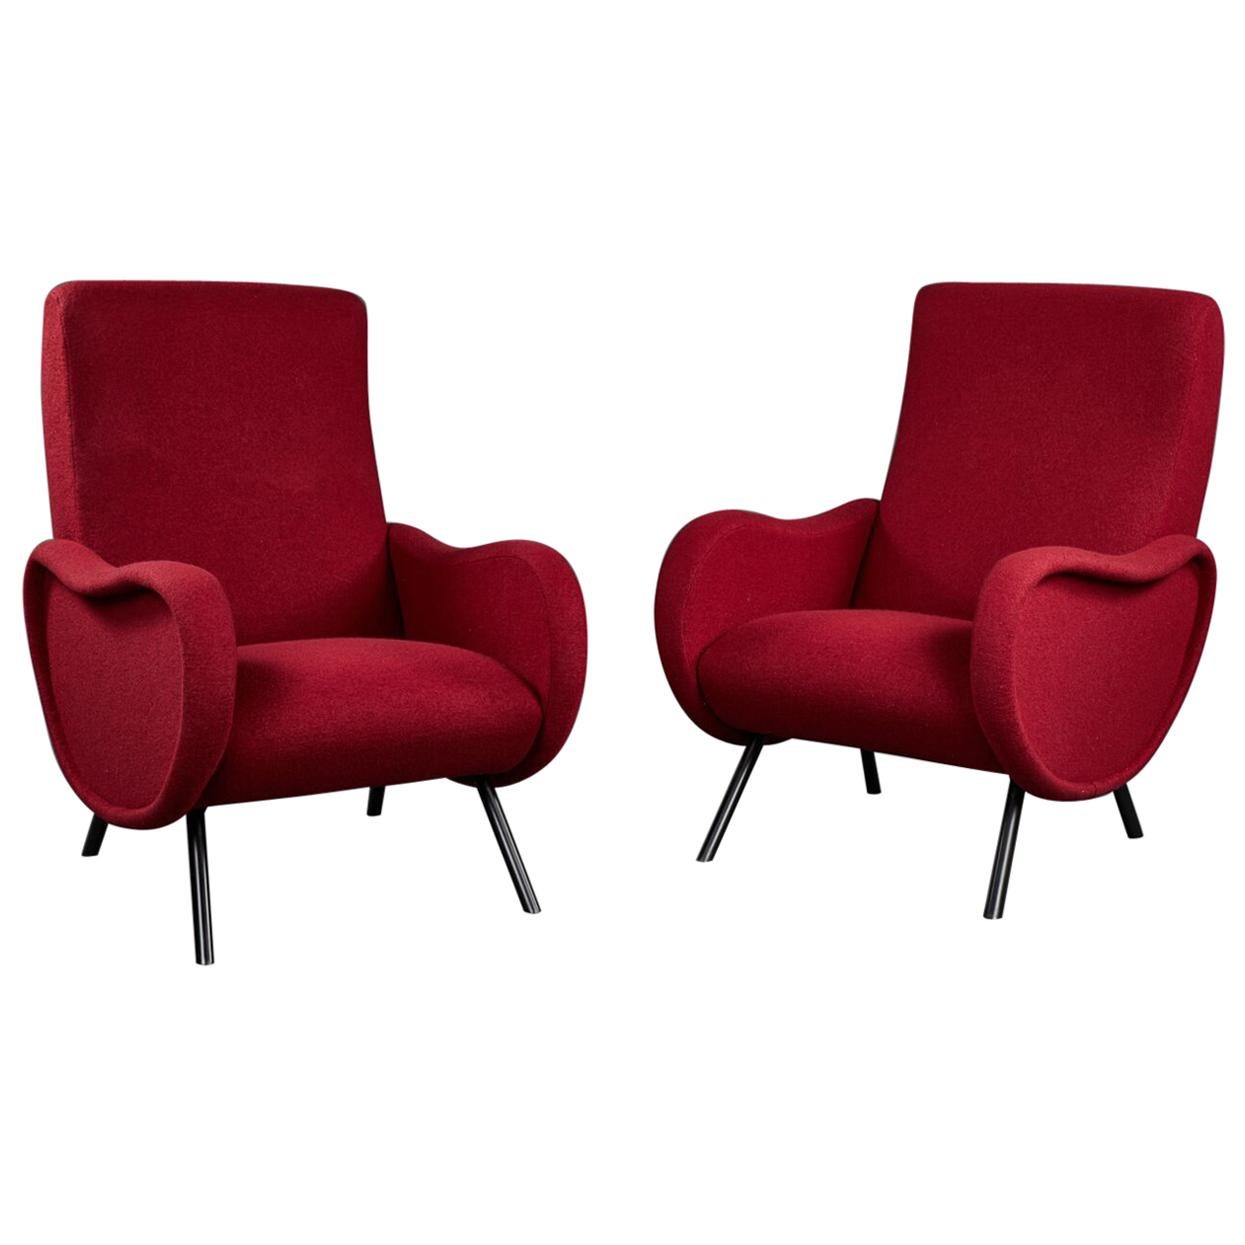 Pair of Sculptural Italian Armchairs in the Manner of Marco Zanuso’s “Lady” For Sale